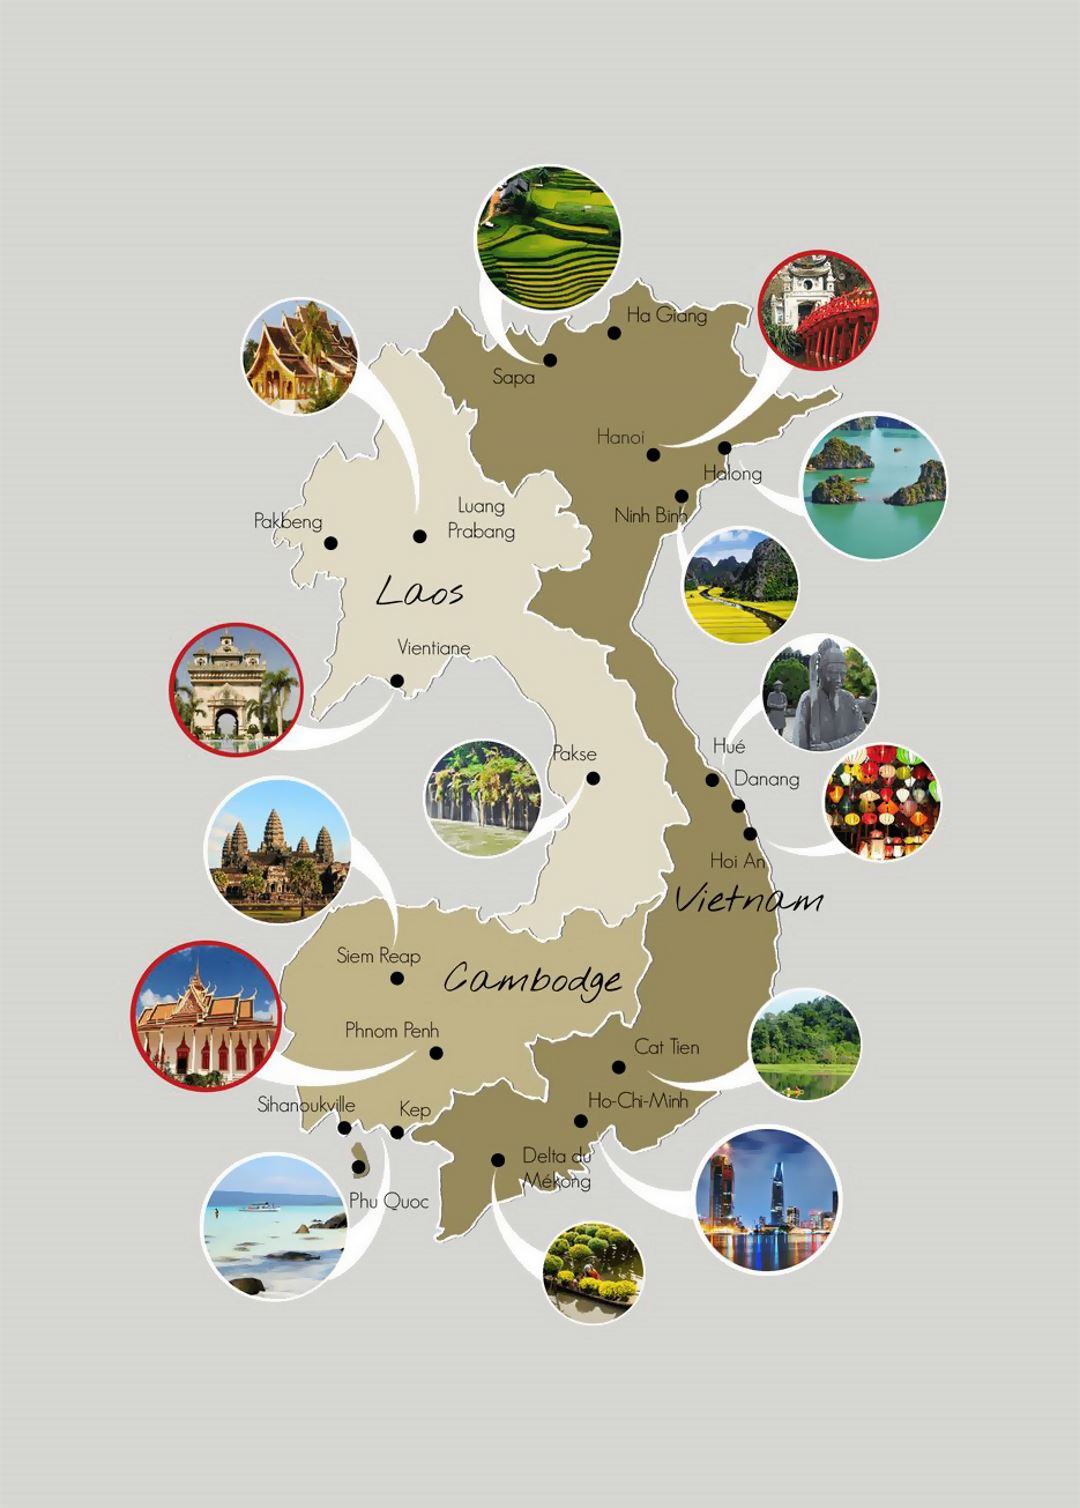 Detailed points of interests map of Laos, Vietnam and Cambodge